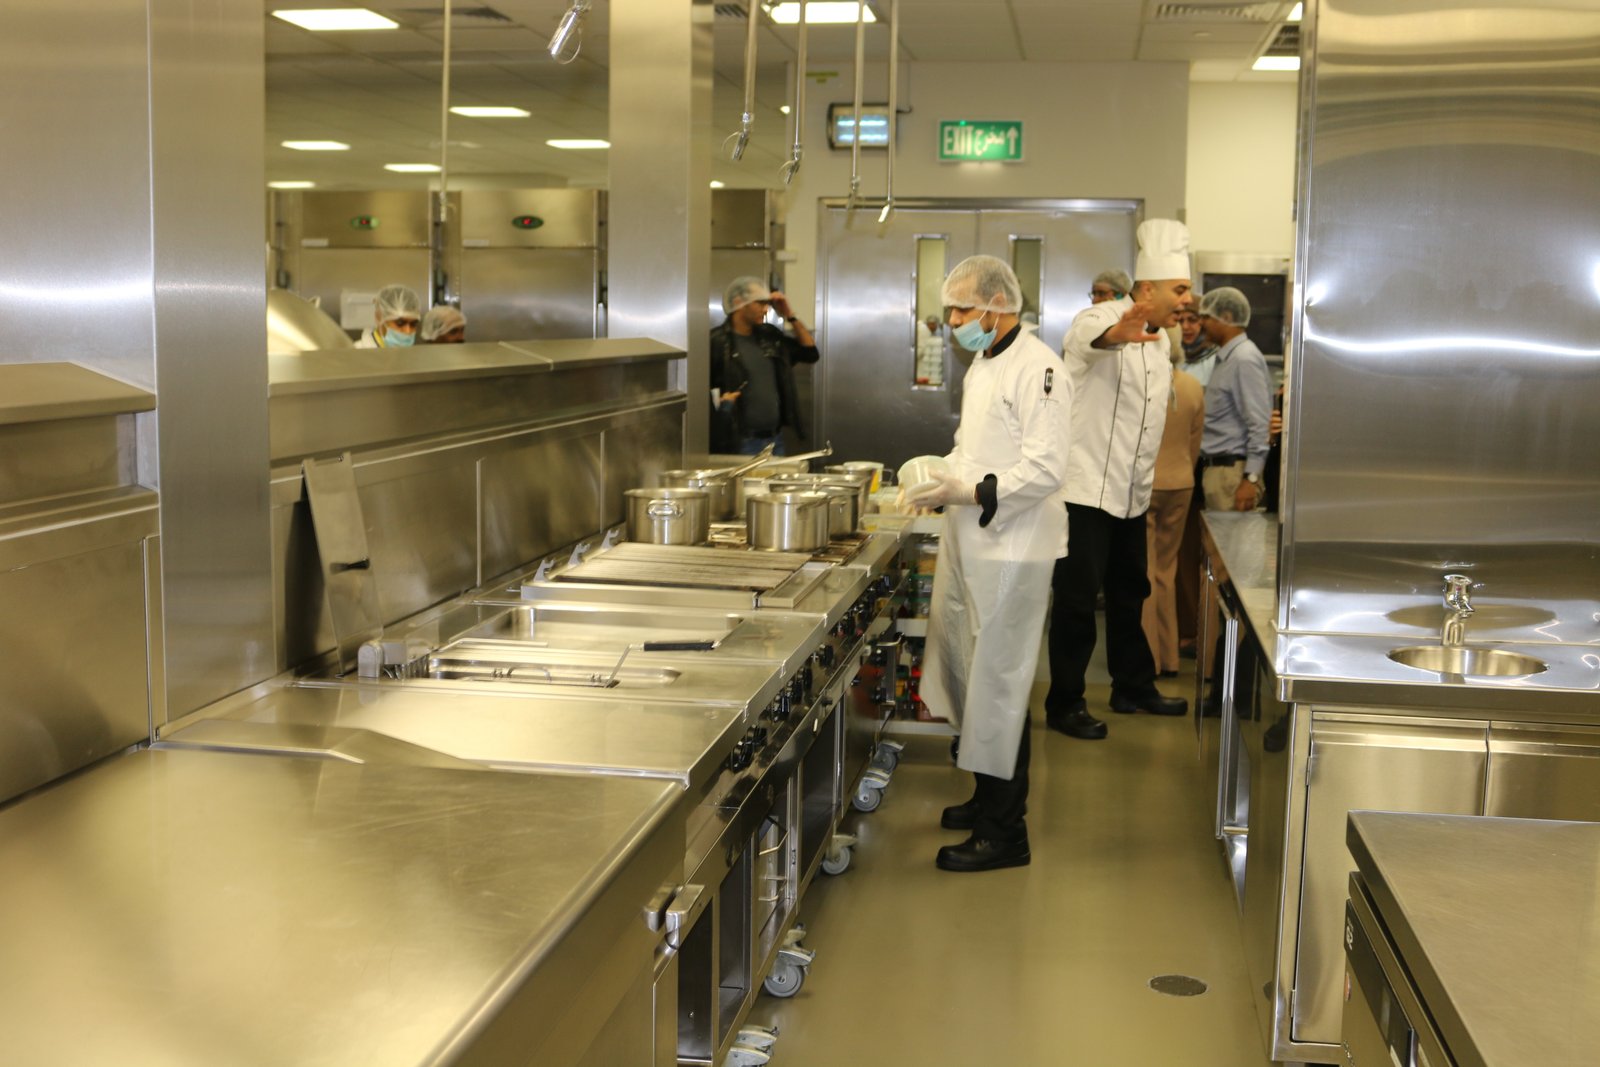 ‘State of the Art’ Healthcare Kitchen Facilities for HMC’s New Medical City Hospitals